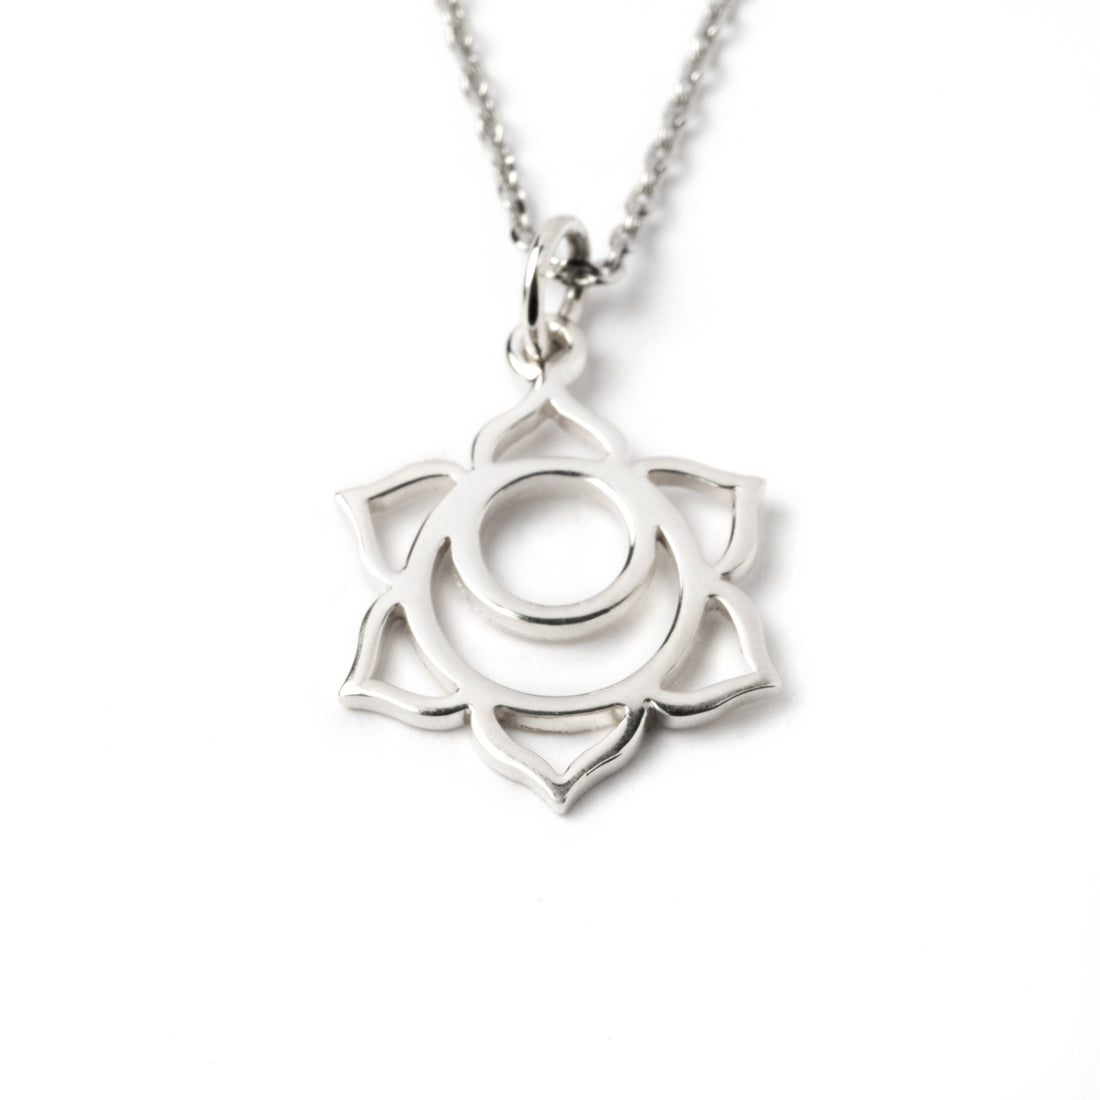 Sterling Silver Sacral Chakra Charm Necklace. The sacral chakra is the second chakra out of seven in the body&